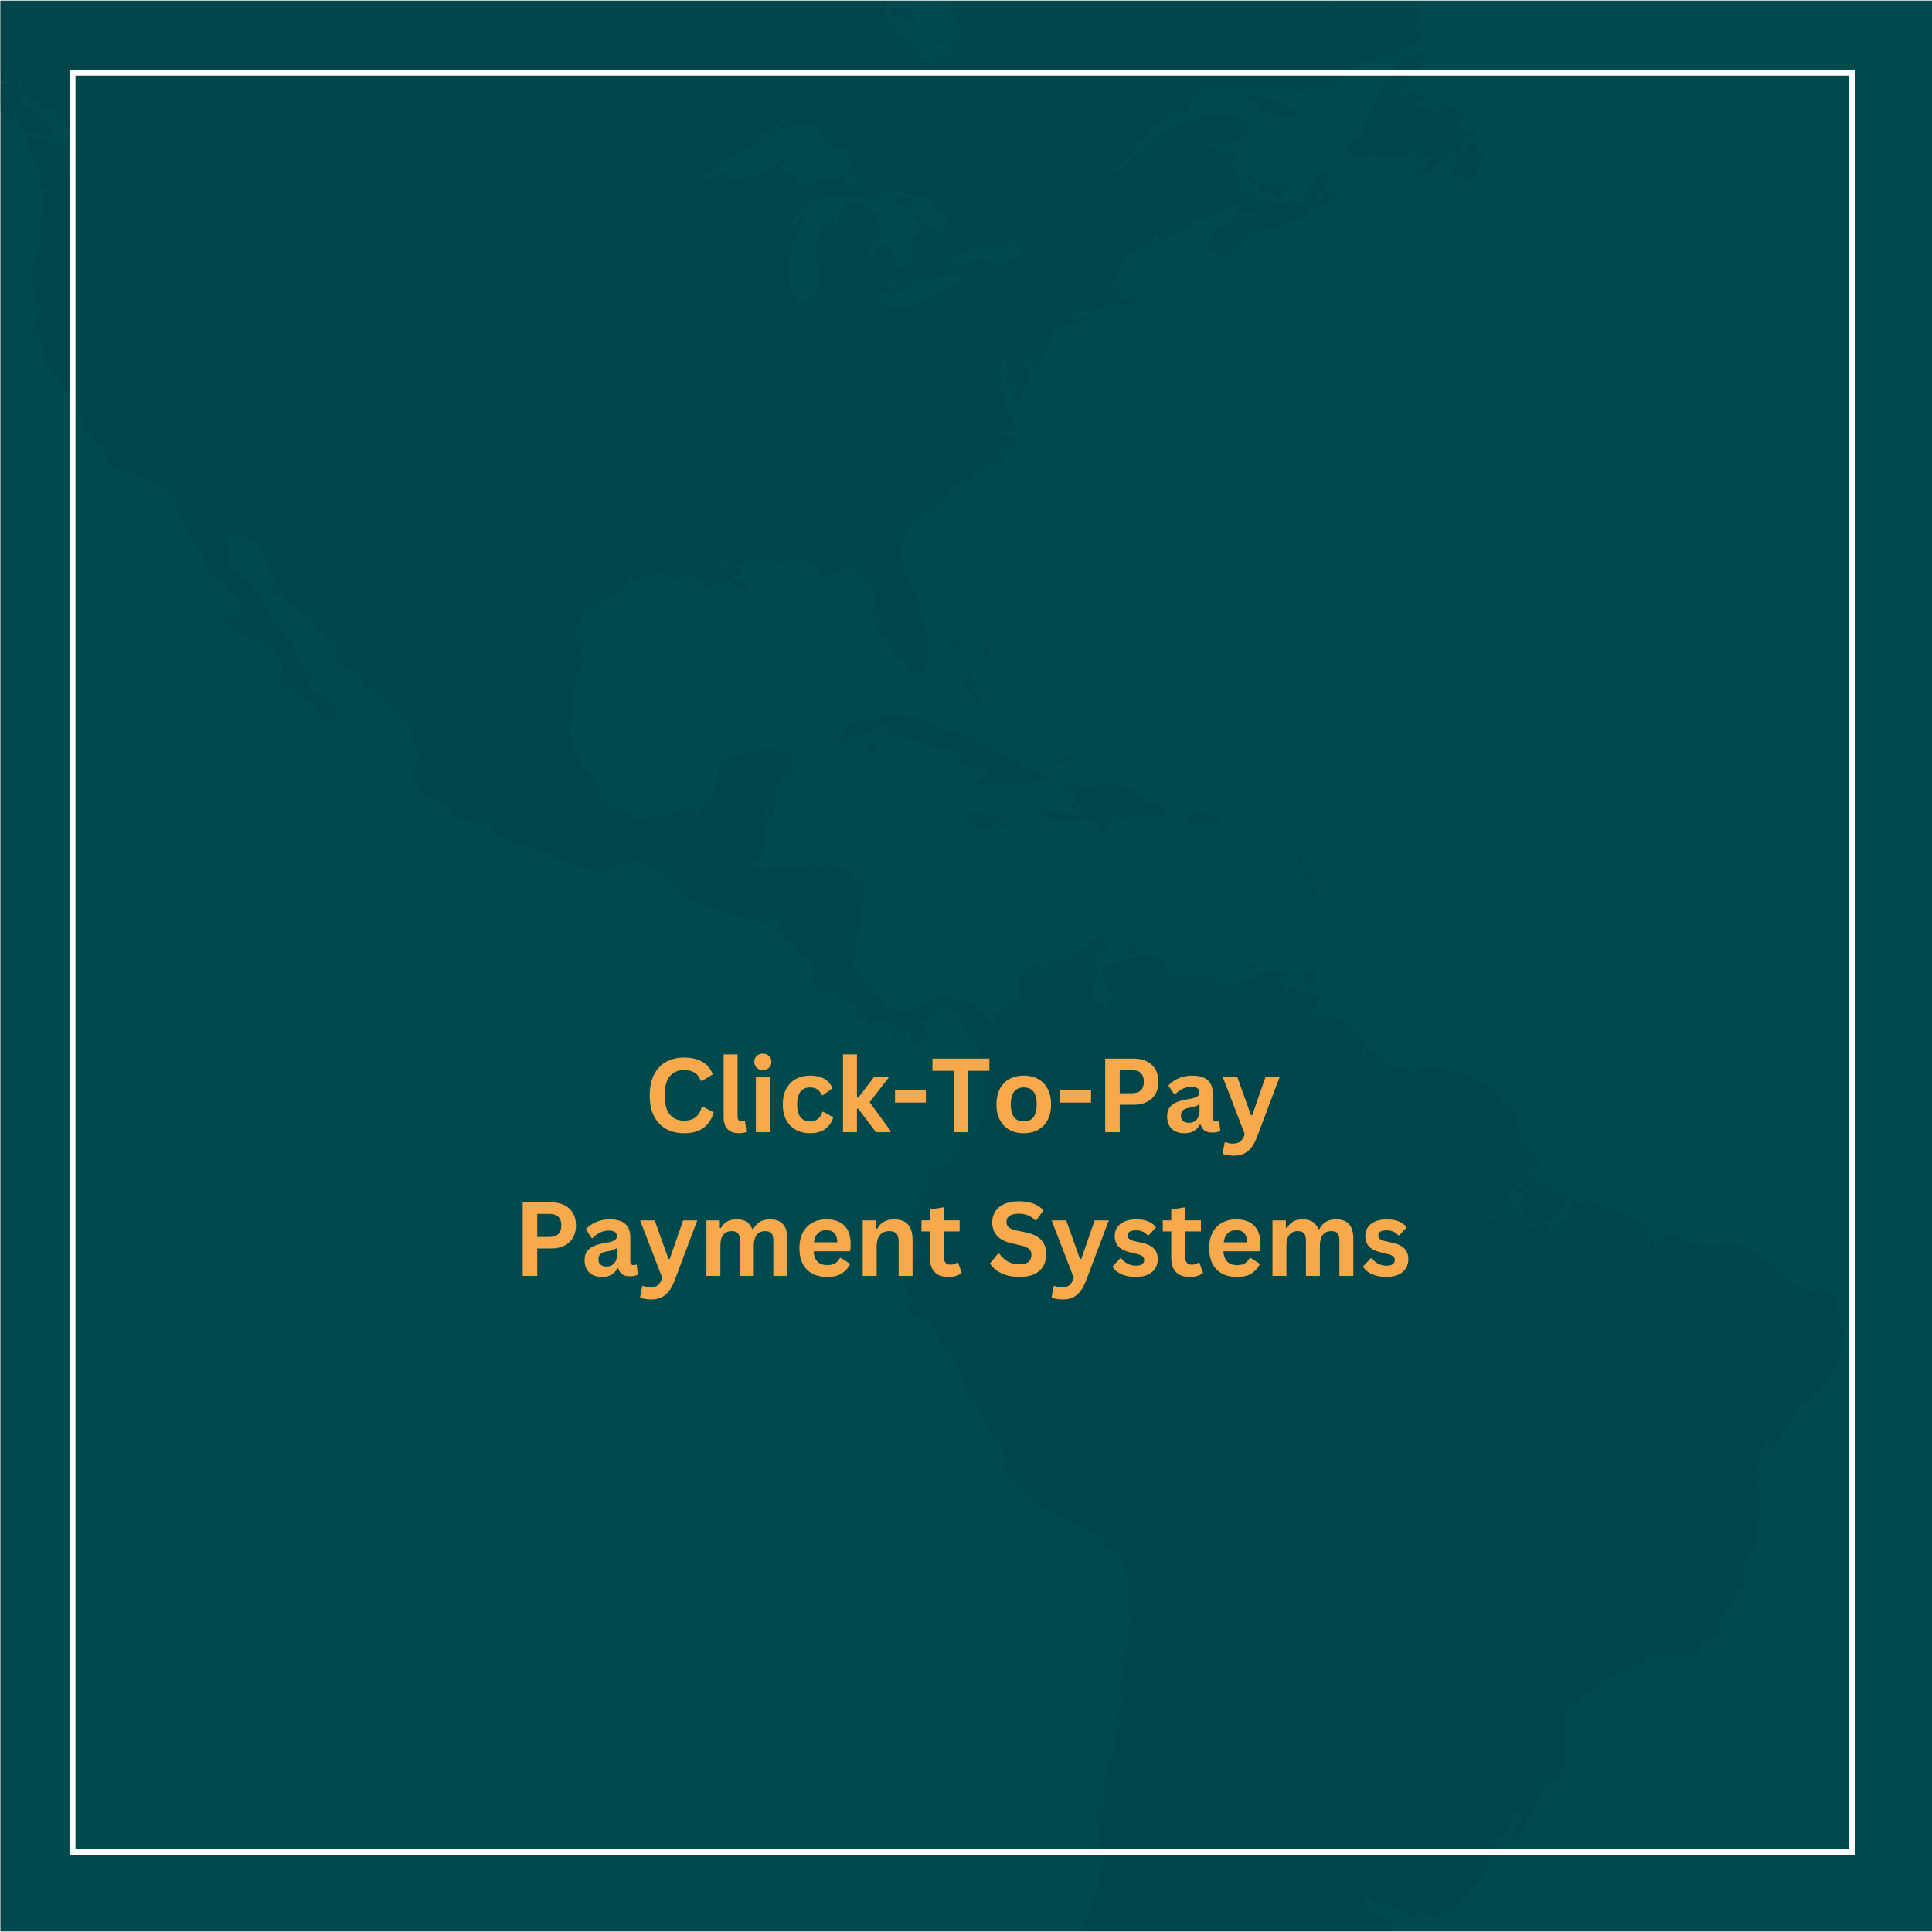 Click-To-Pay Payment Systems